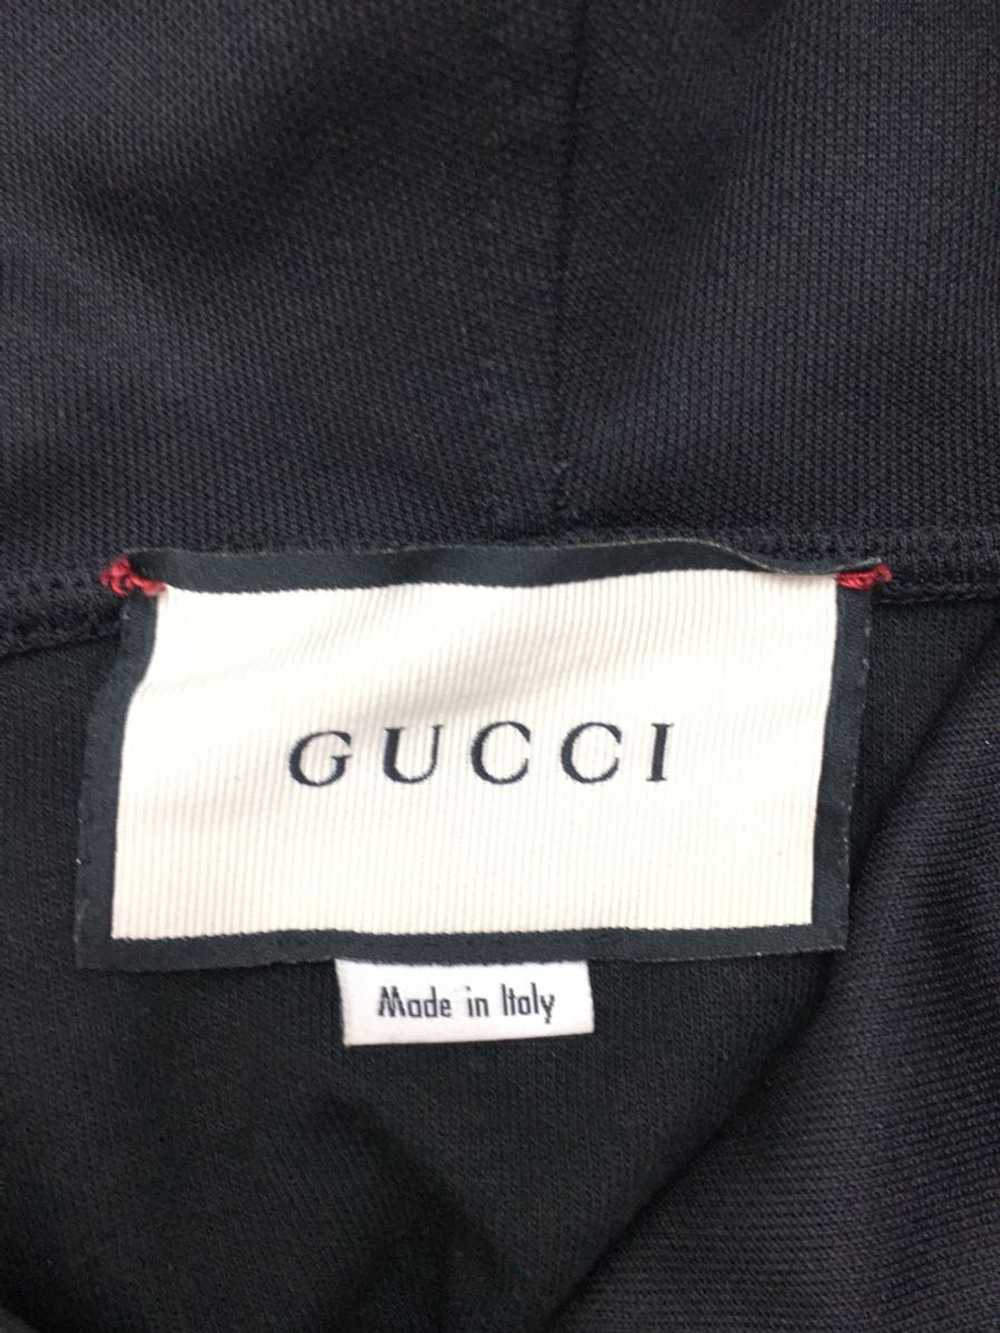 GUCCI Hoodie/Xl/Polyester/Blk/475354 Men'S Wear - image 3